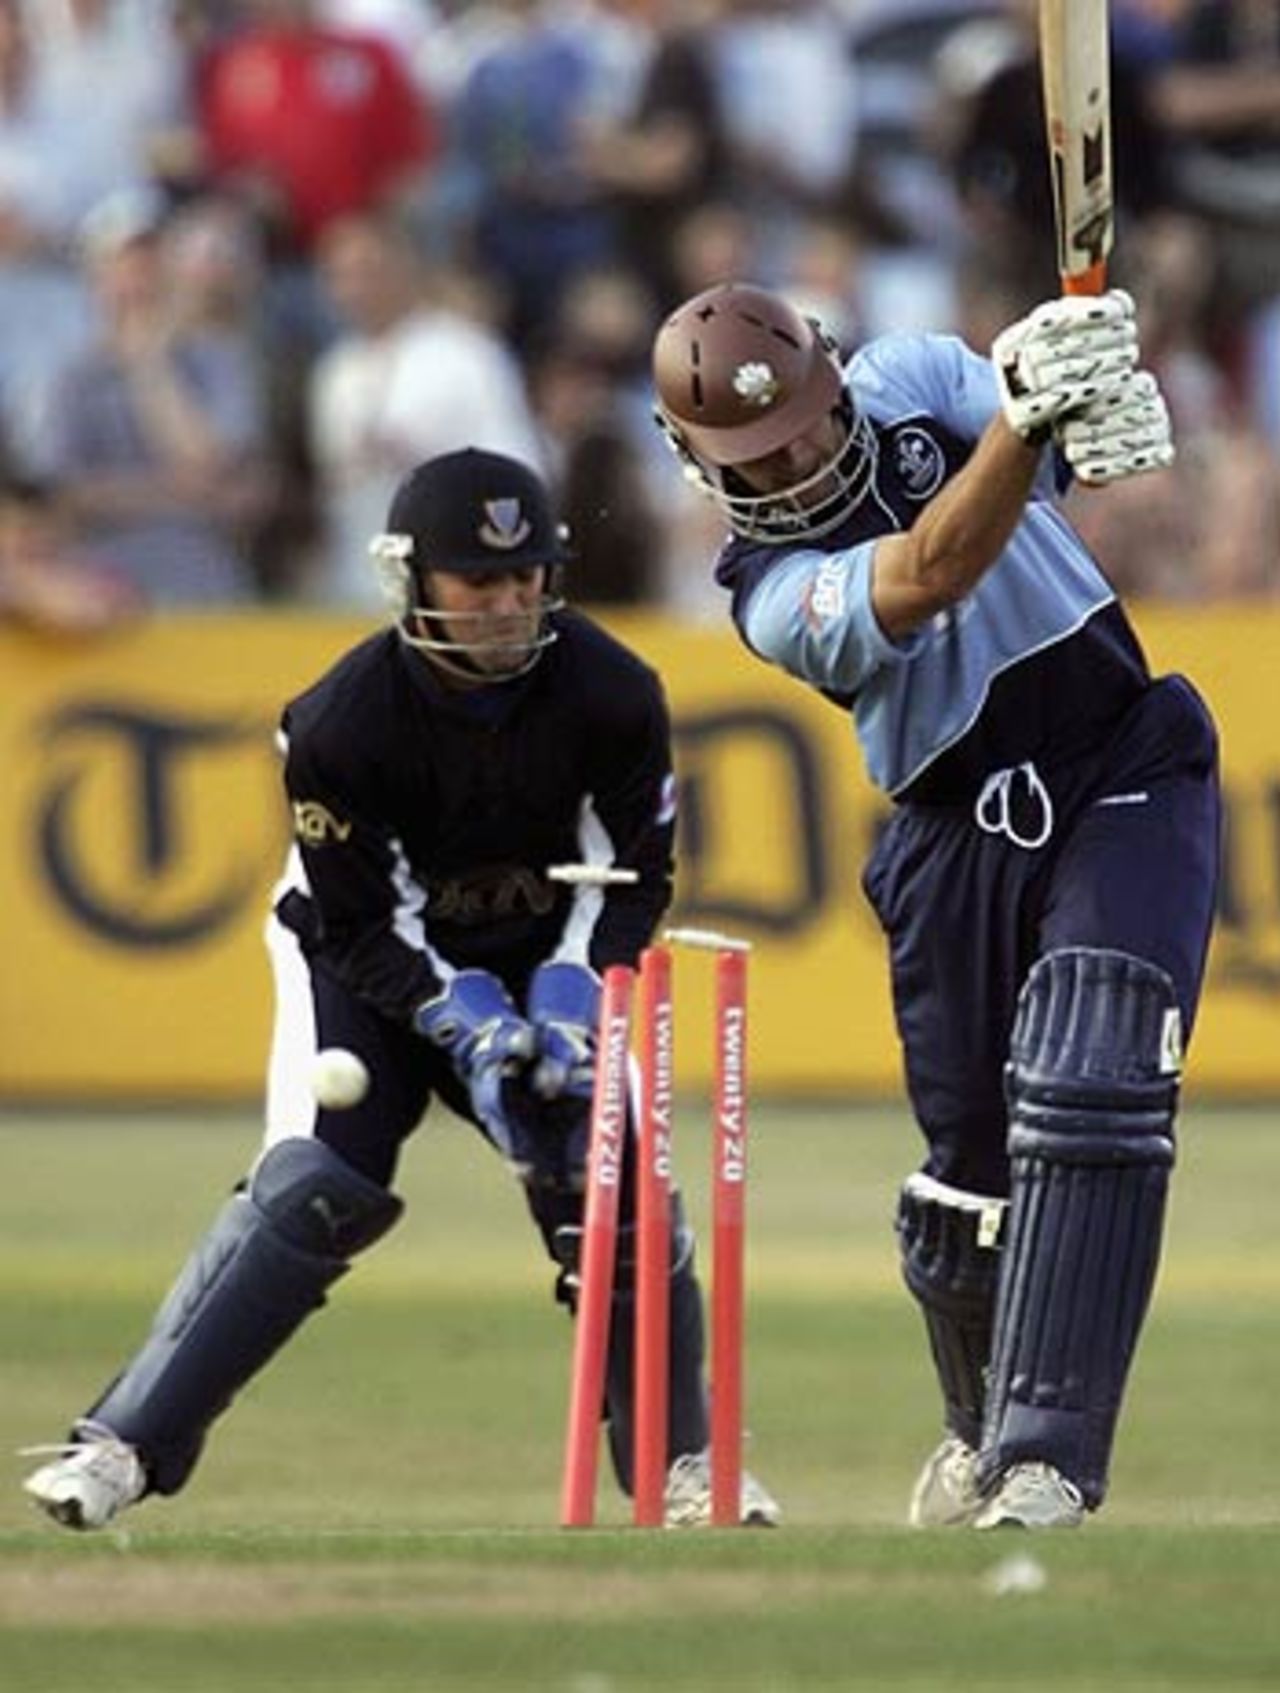 Stewart Walters is bowled by Mushtaq Ahmed, Surrey v Sussex, Twenty20 Cup, Hove, June 30, 2006